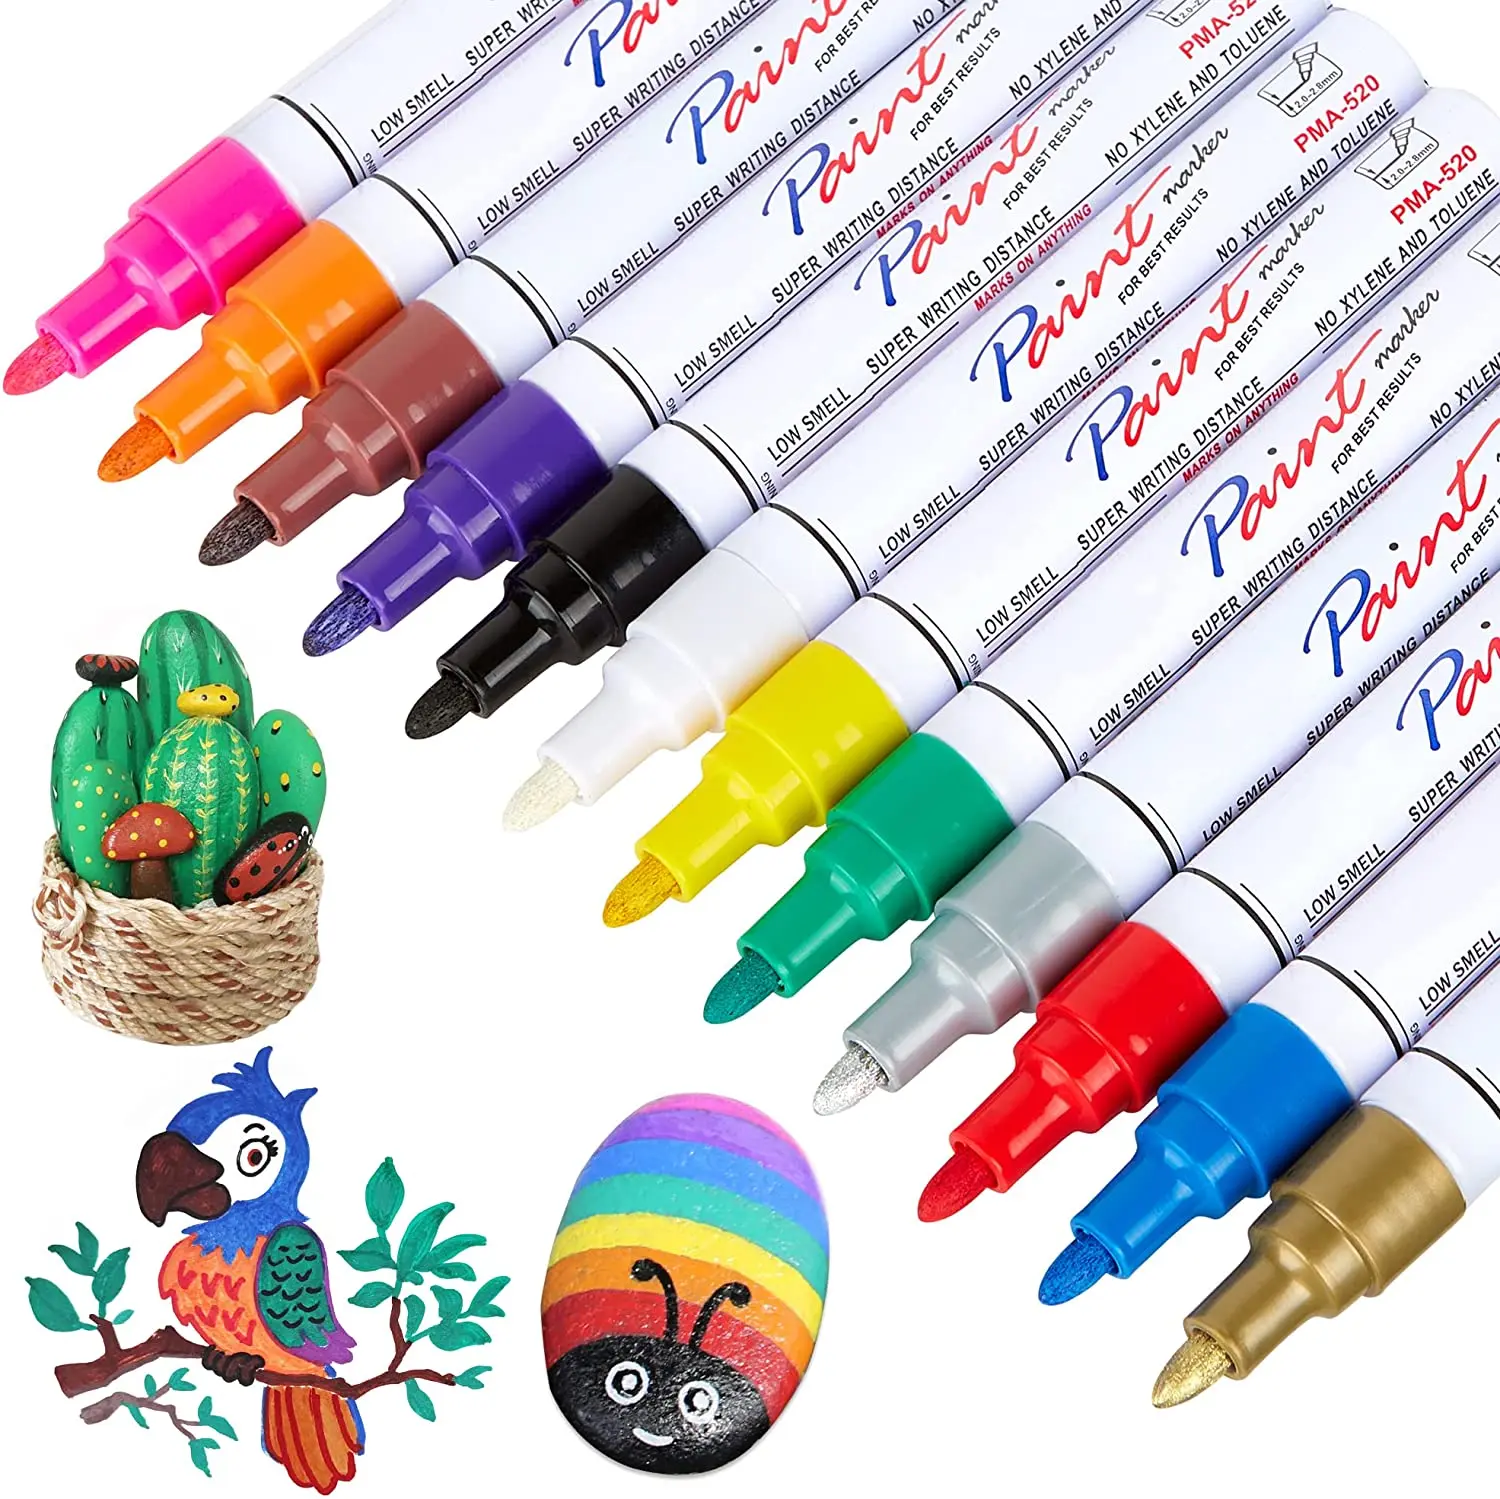 Paint Markers, 20 Colors Oil-Based Waterproof Paint Marker Pen Set, Never  Fade Quick Dry and Permanent, Works on Rocks Painting, Wood, Fabric